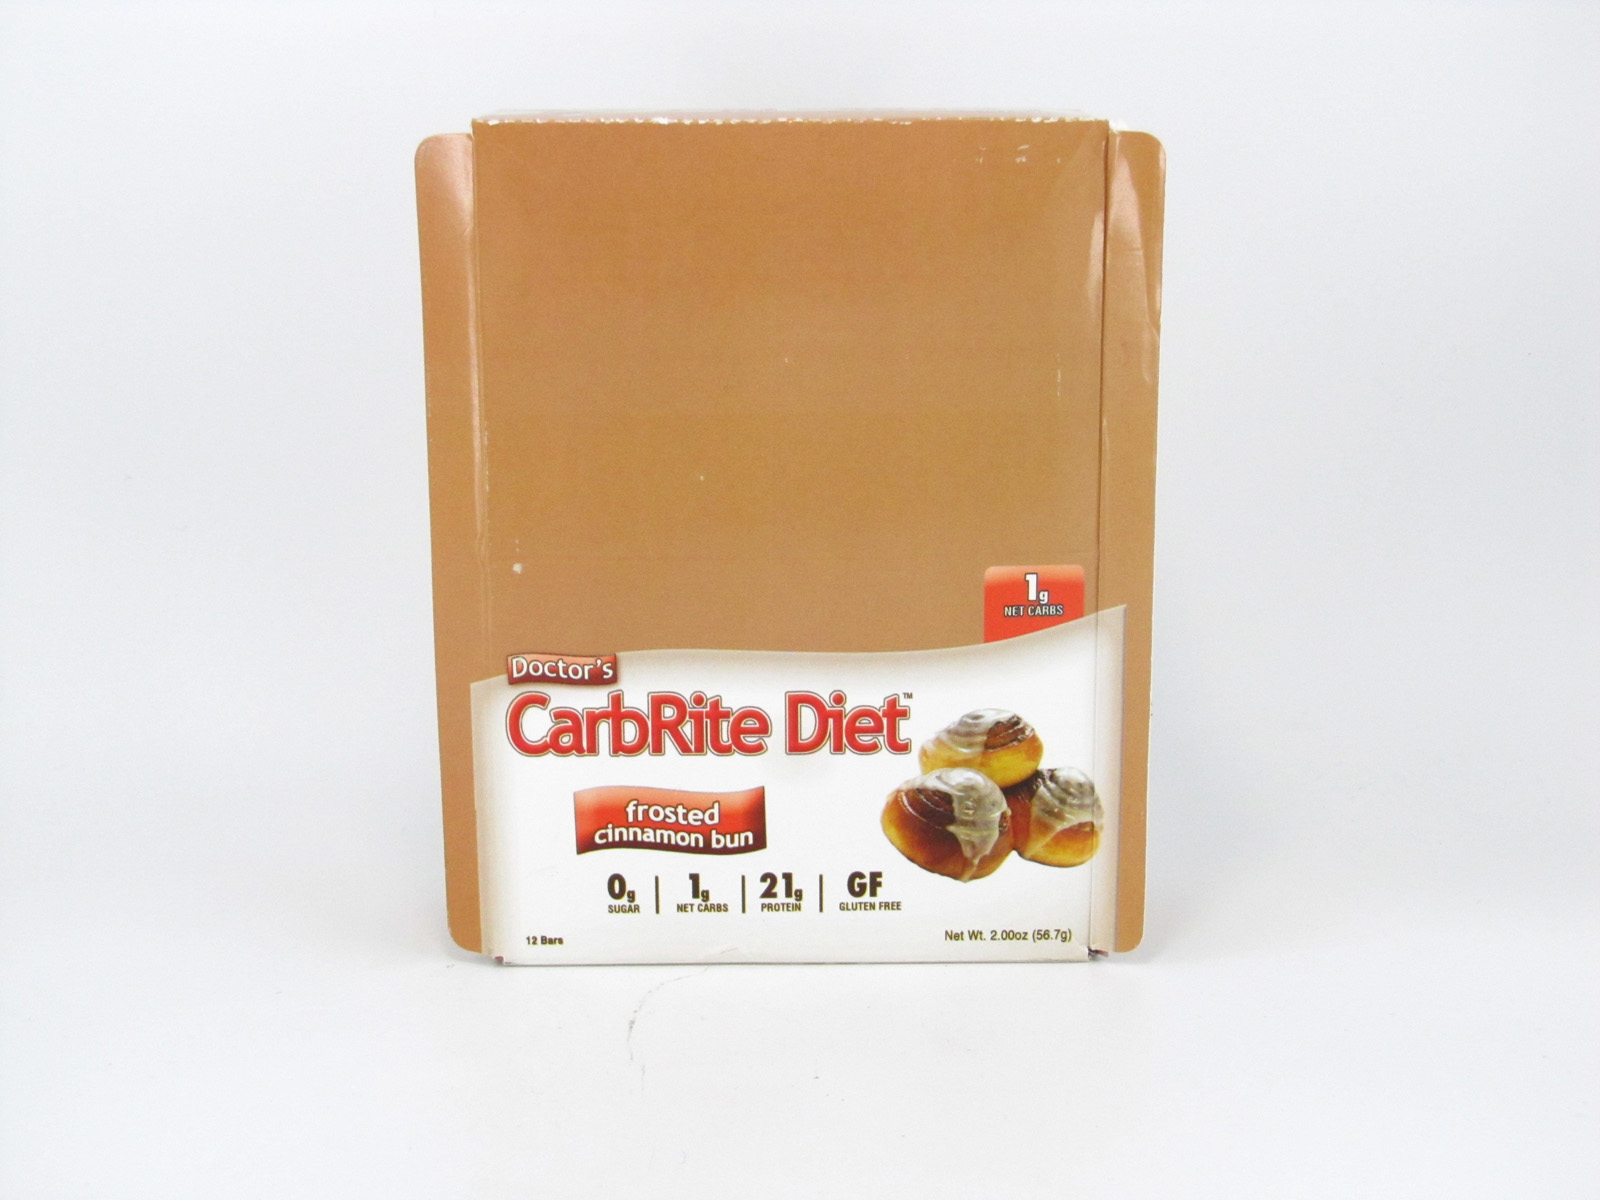 Doctor's CarbRite Diet - Frosted Cinnamon Bun - Box view